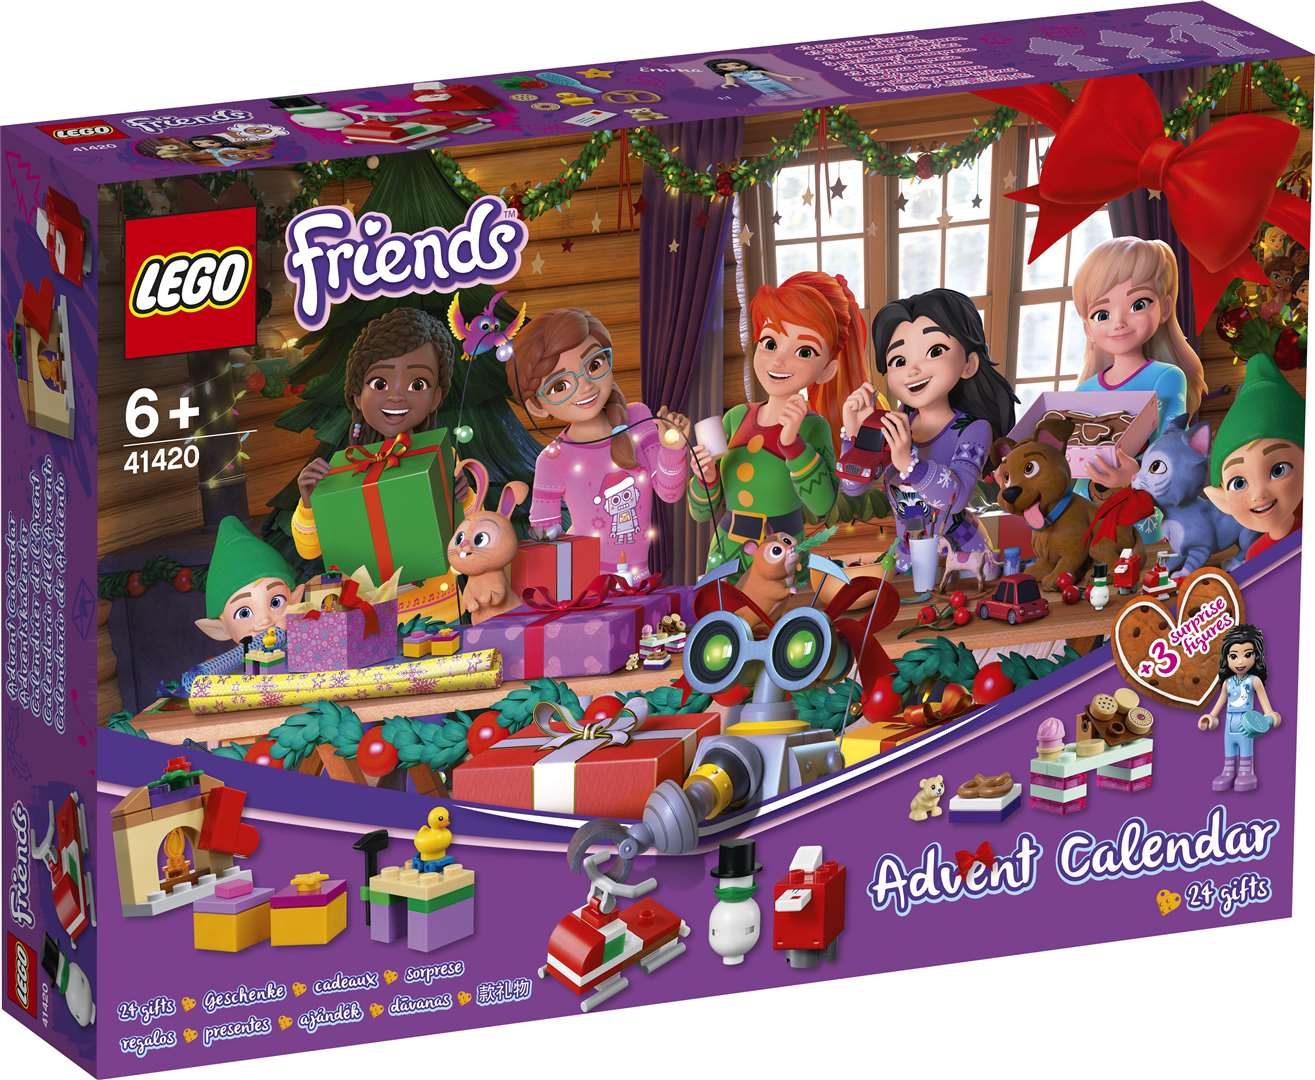 There is a new LEGO Friends calendar for 2020